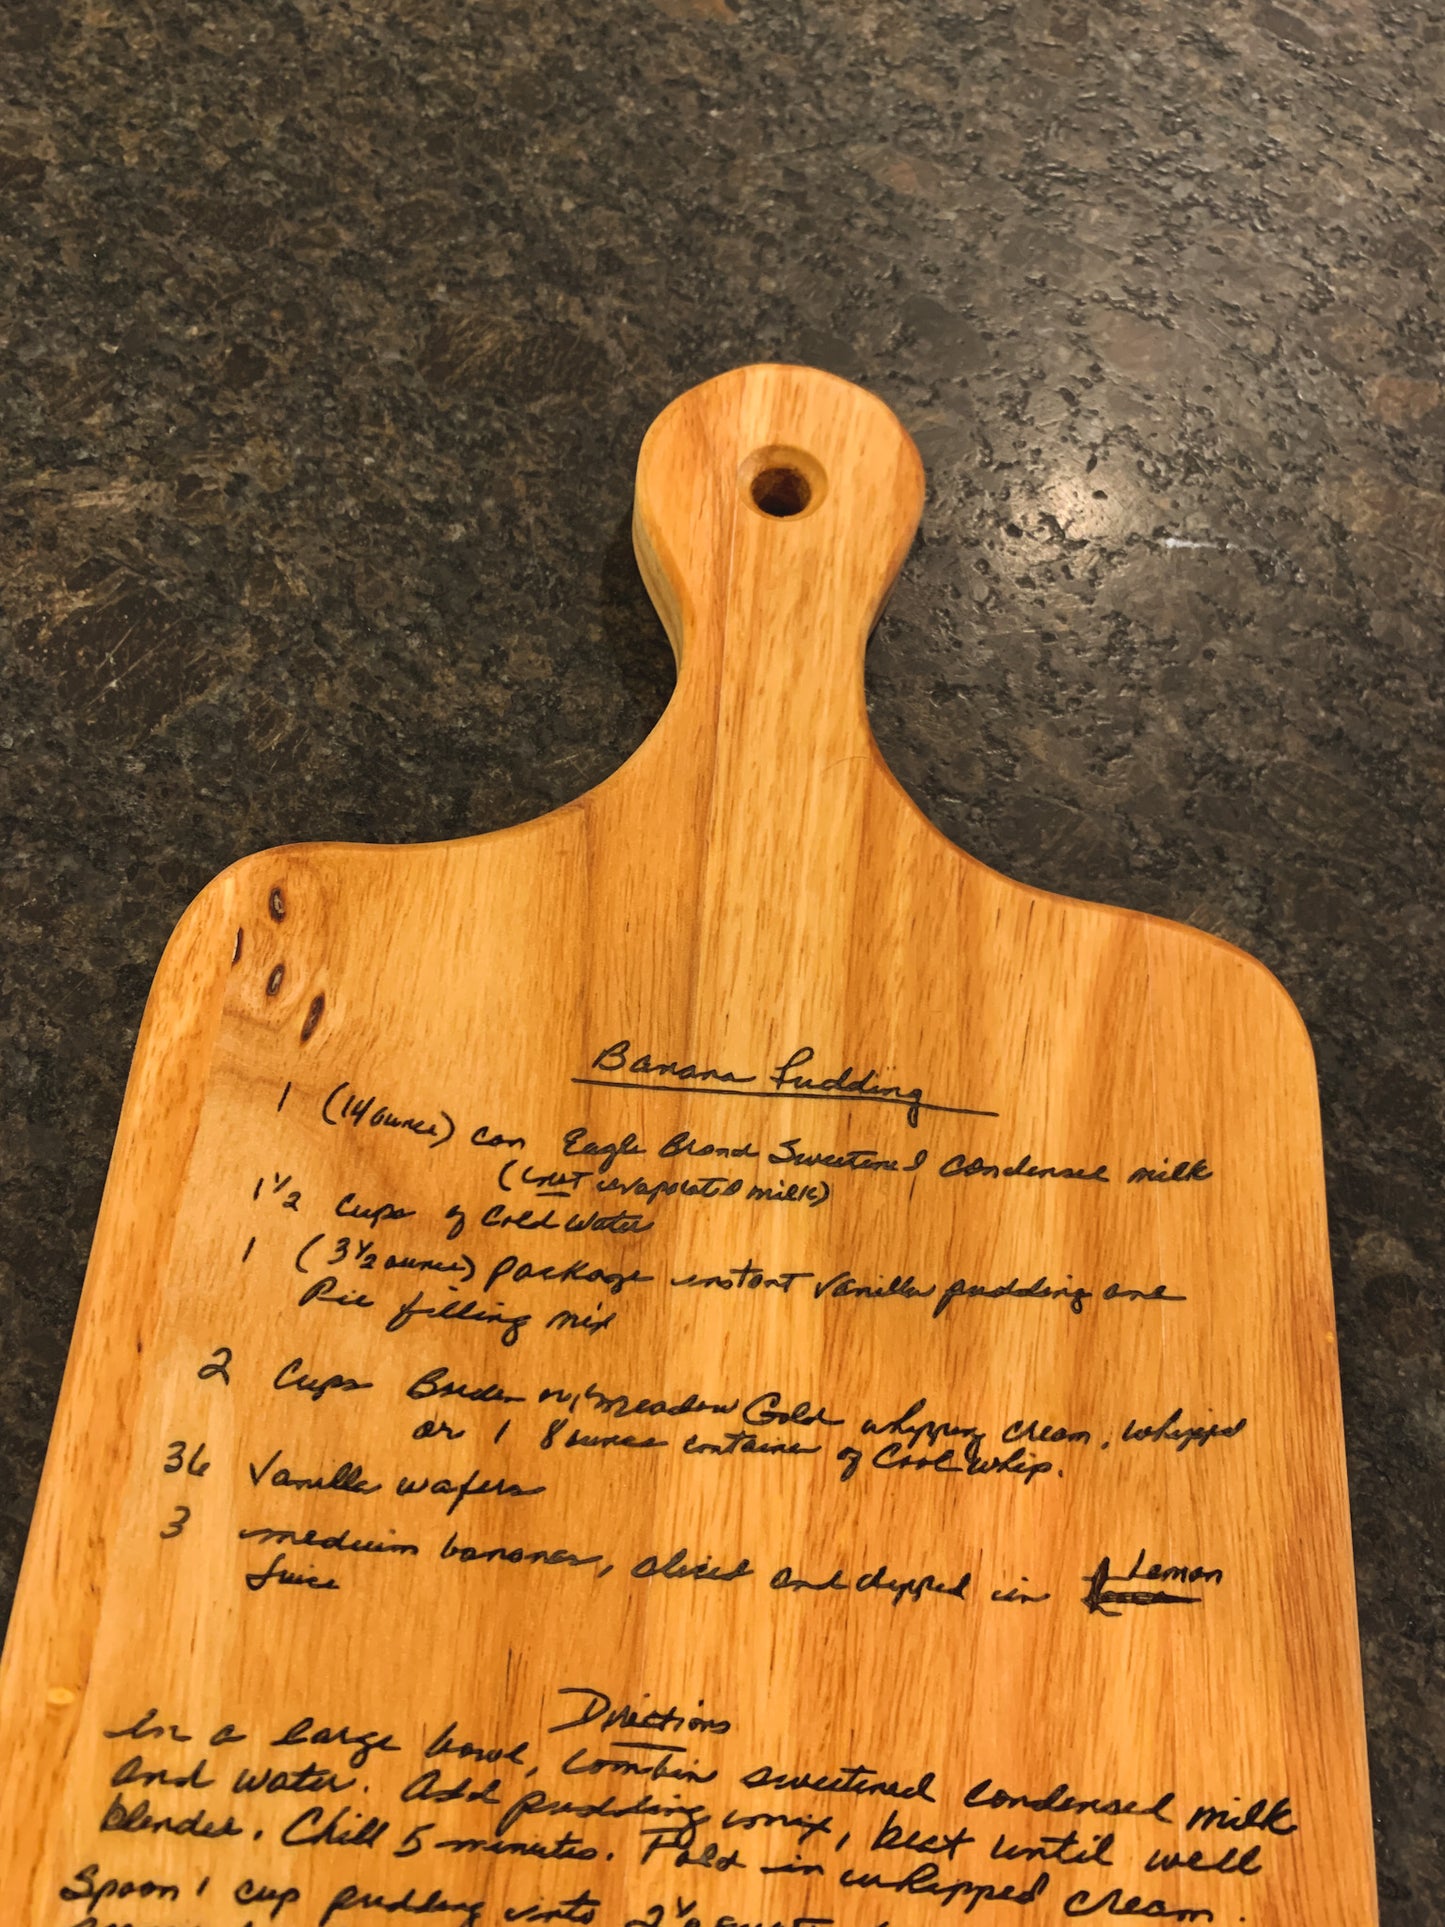 Large 18" Personalized Serving Board with handle, engraved handwritten recipe